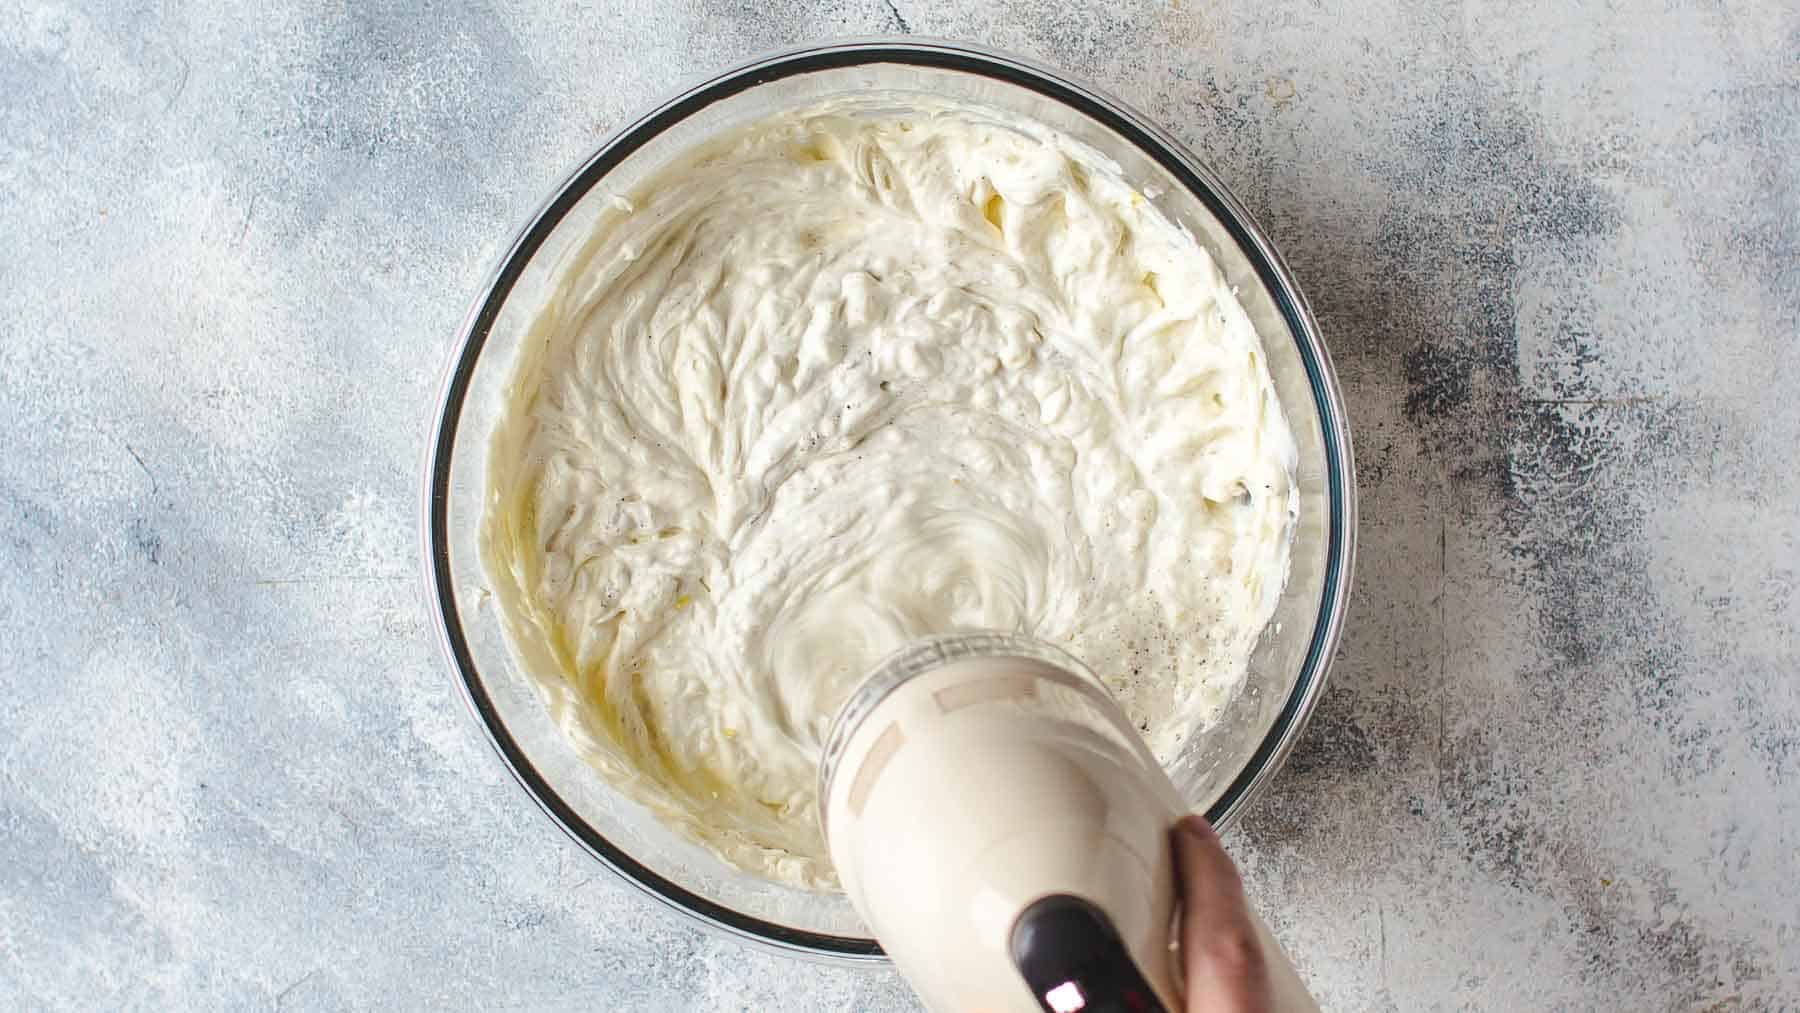 curdled looking cream cheese mixture mixing in a pan